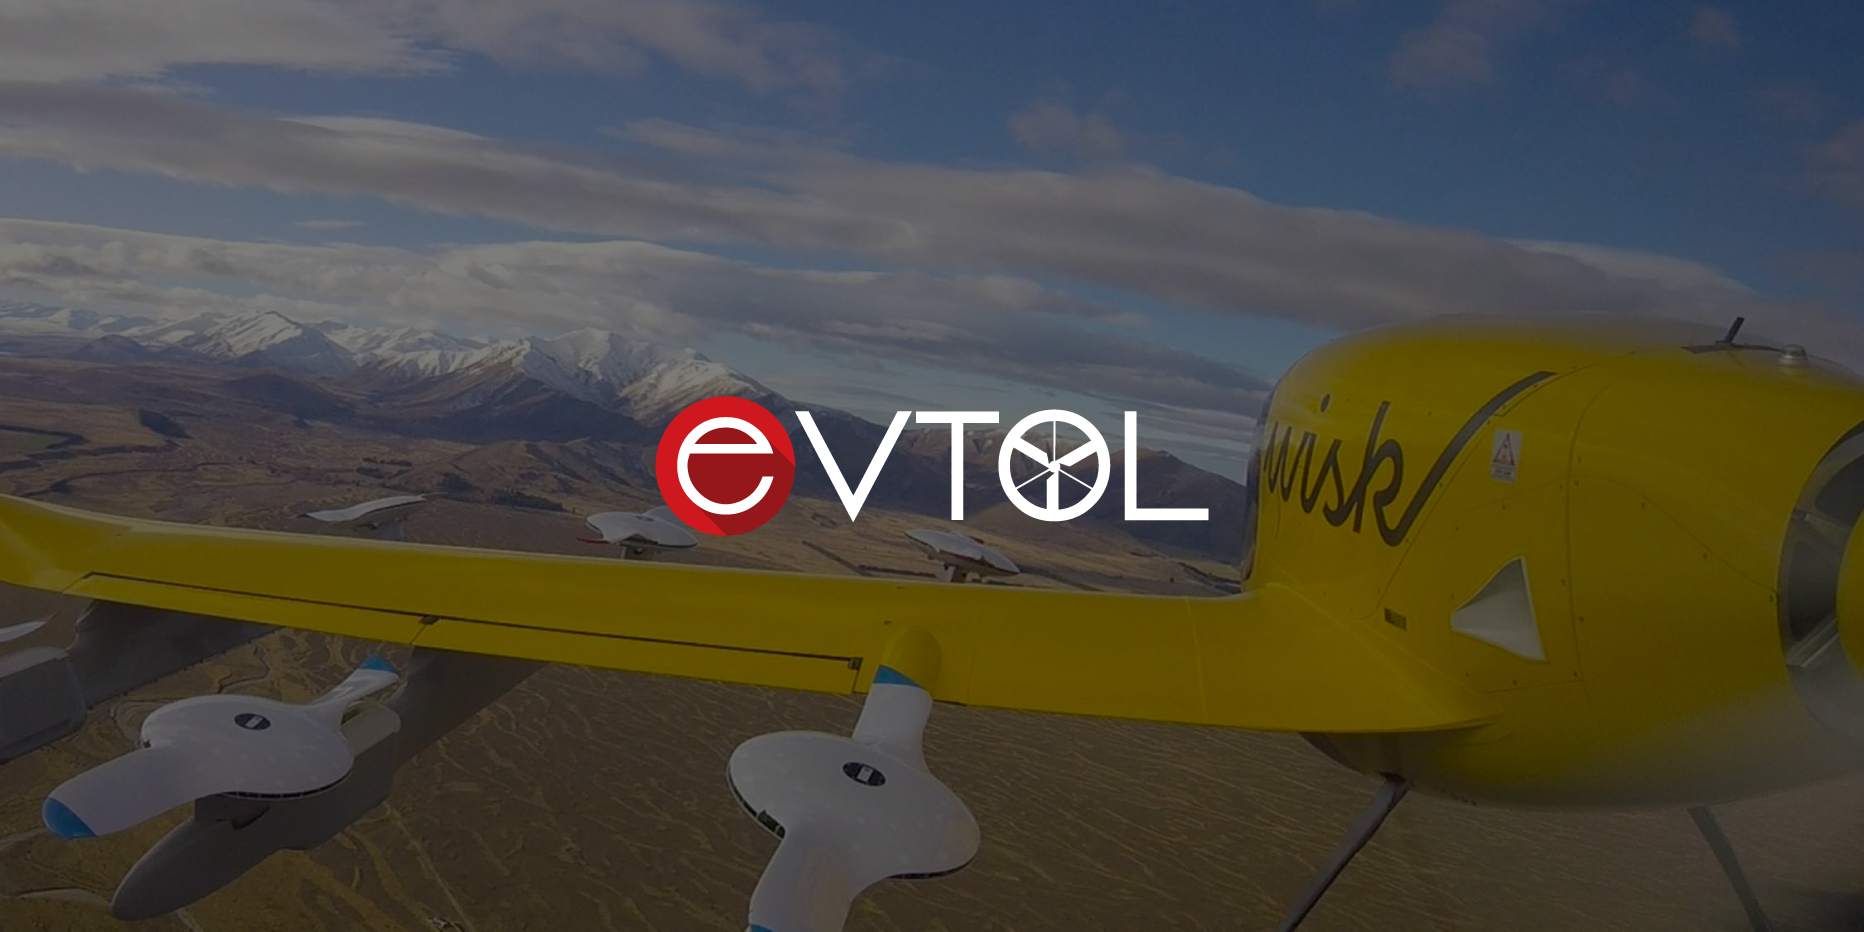 Bringing autonomous AAM to New Zealand through Airspace Integration Trials